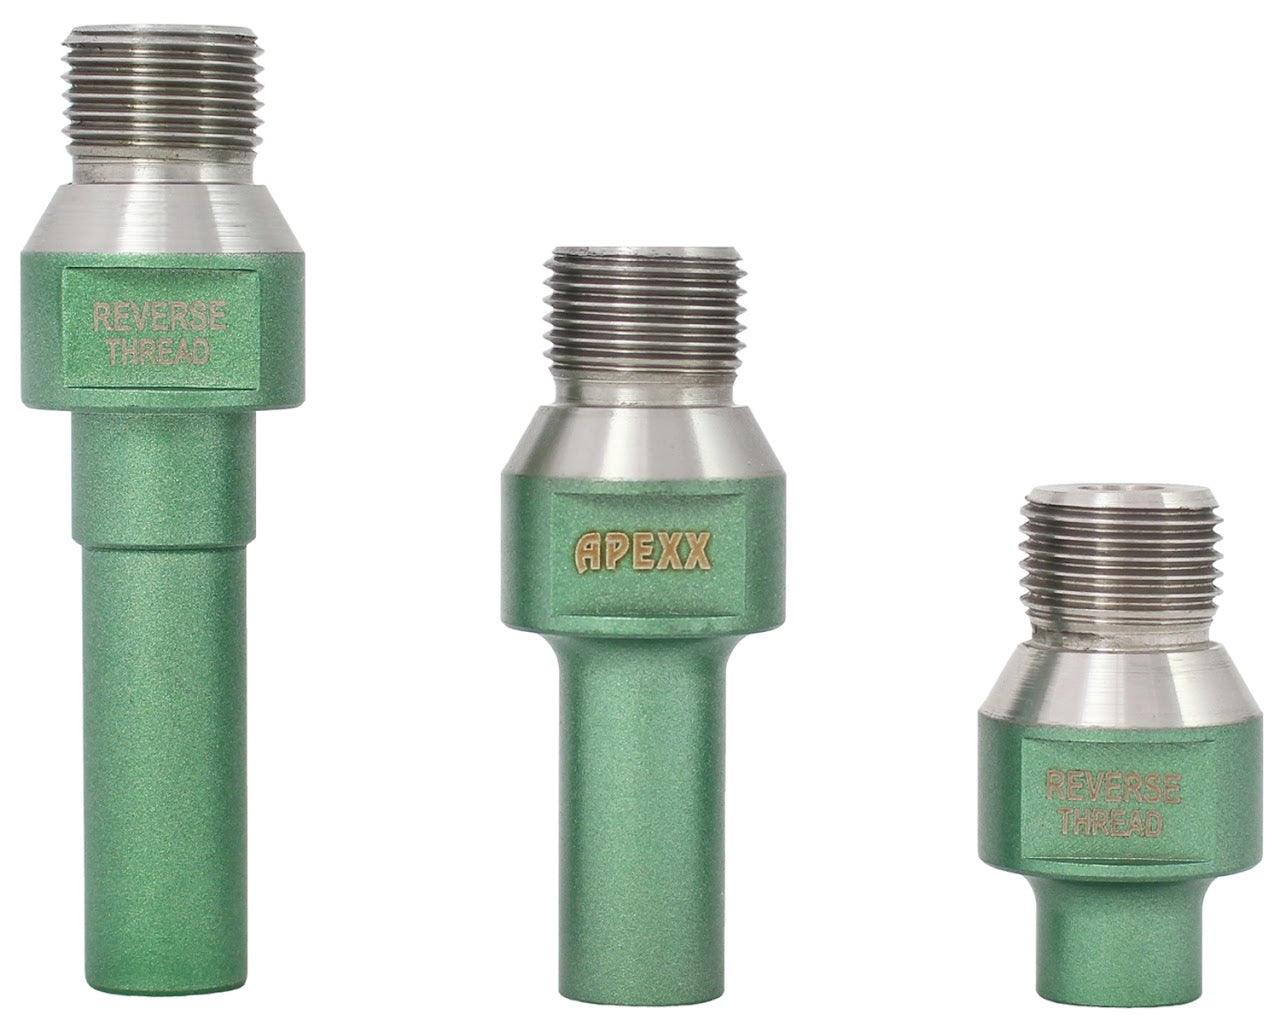 APEXX Reverse-Thread Adapters for Incremental Cutting Bits 4" - Direct Stone Tool Supply, Inc